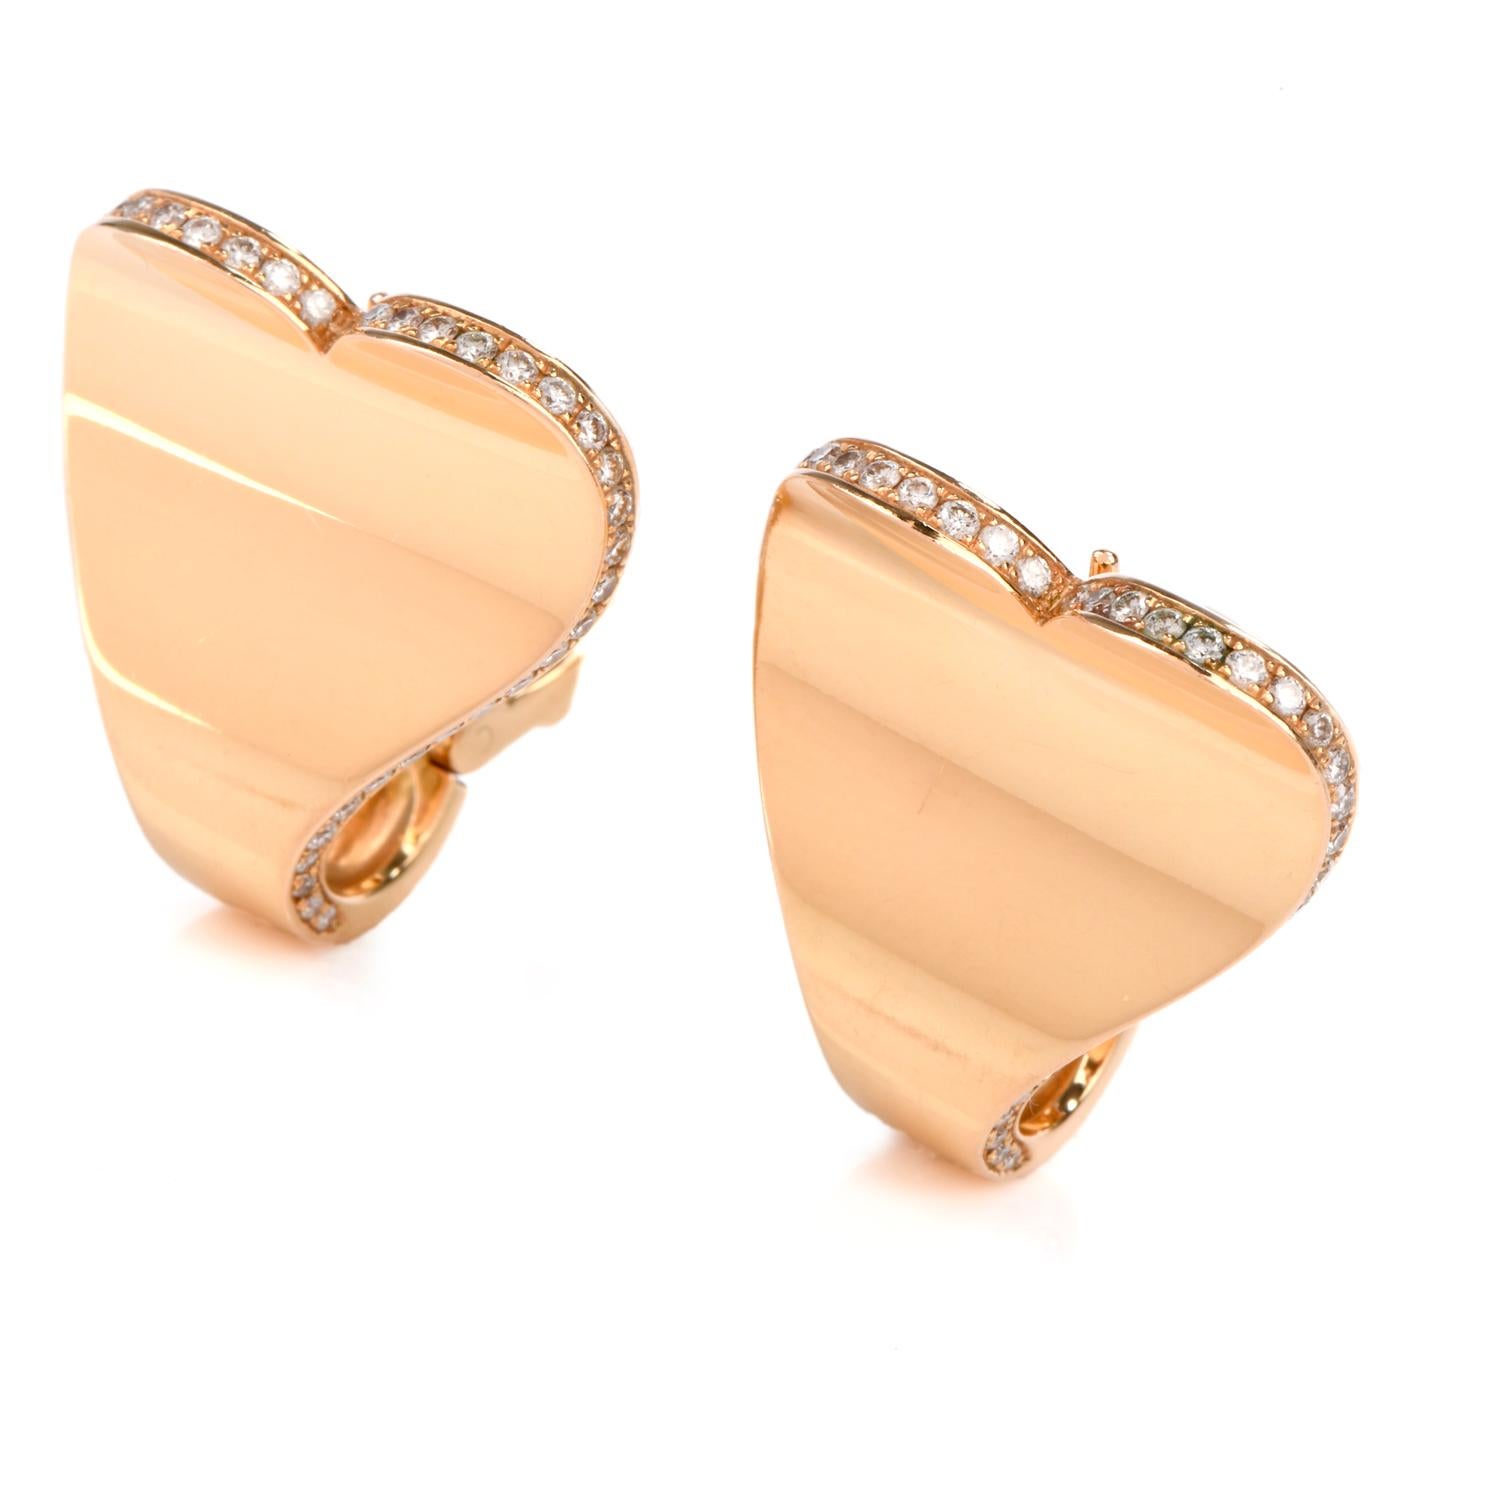 These Roger Dubuis love filled Diamond Earrings were inspired in a Heart motif

and crafted in 18 Karat Yellow Gold.

100 round brilliant cut diamond adorn the outer most edges and weigh approx. 1.00 carat and are of F-G color and VVS2-VS1